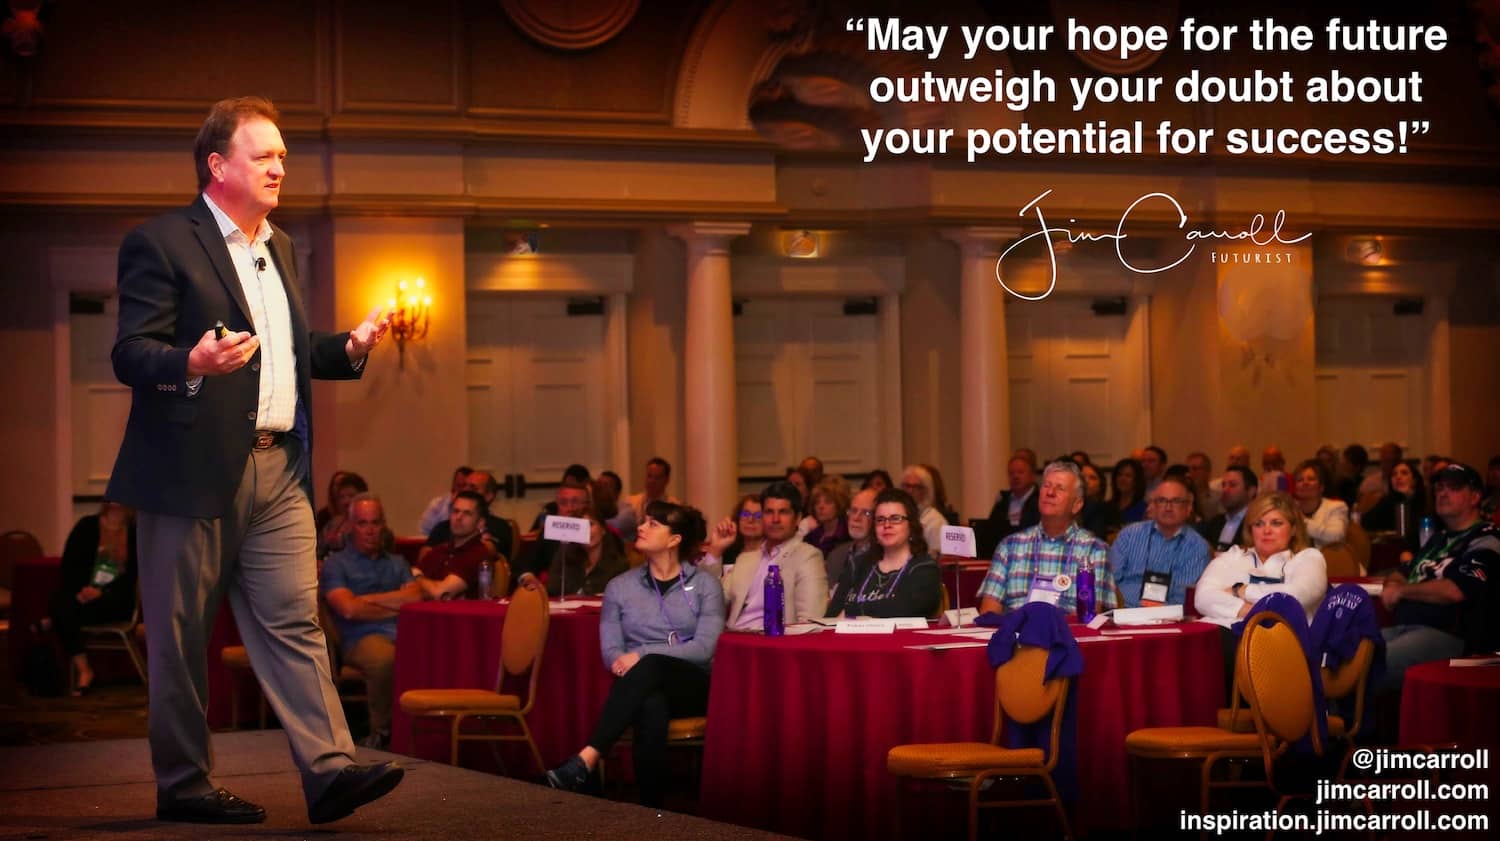 Daily Inspiration: “May your hope for the future outweigh your doubt about your potential for success!”